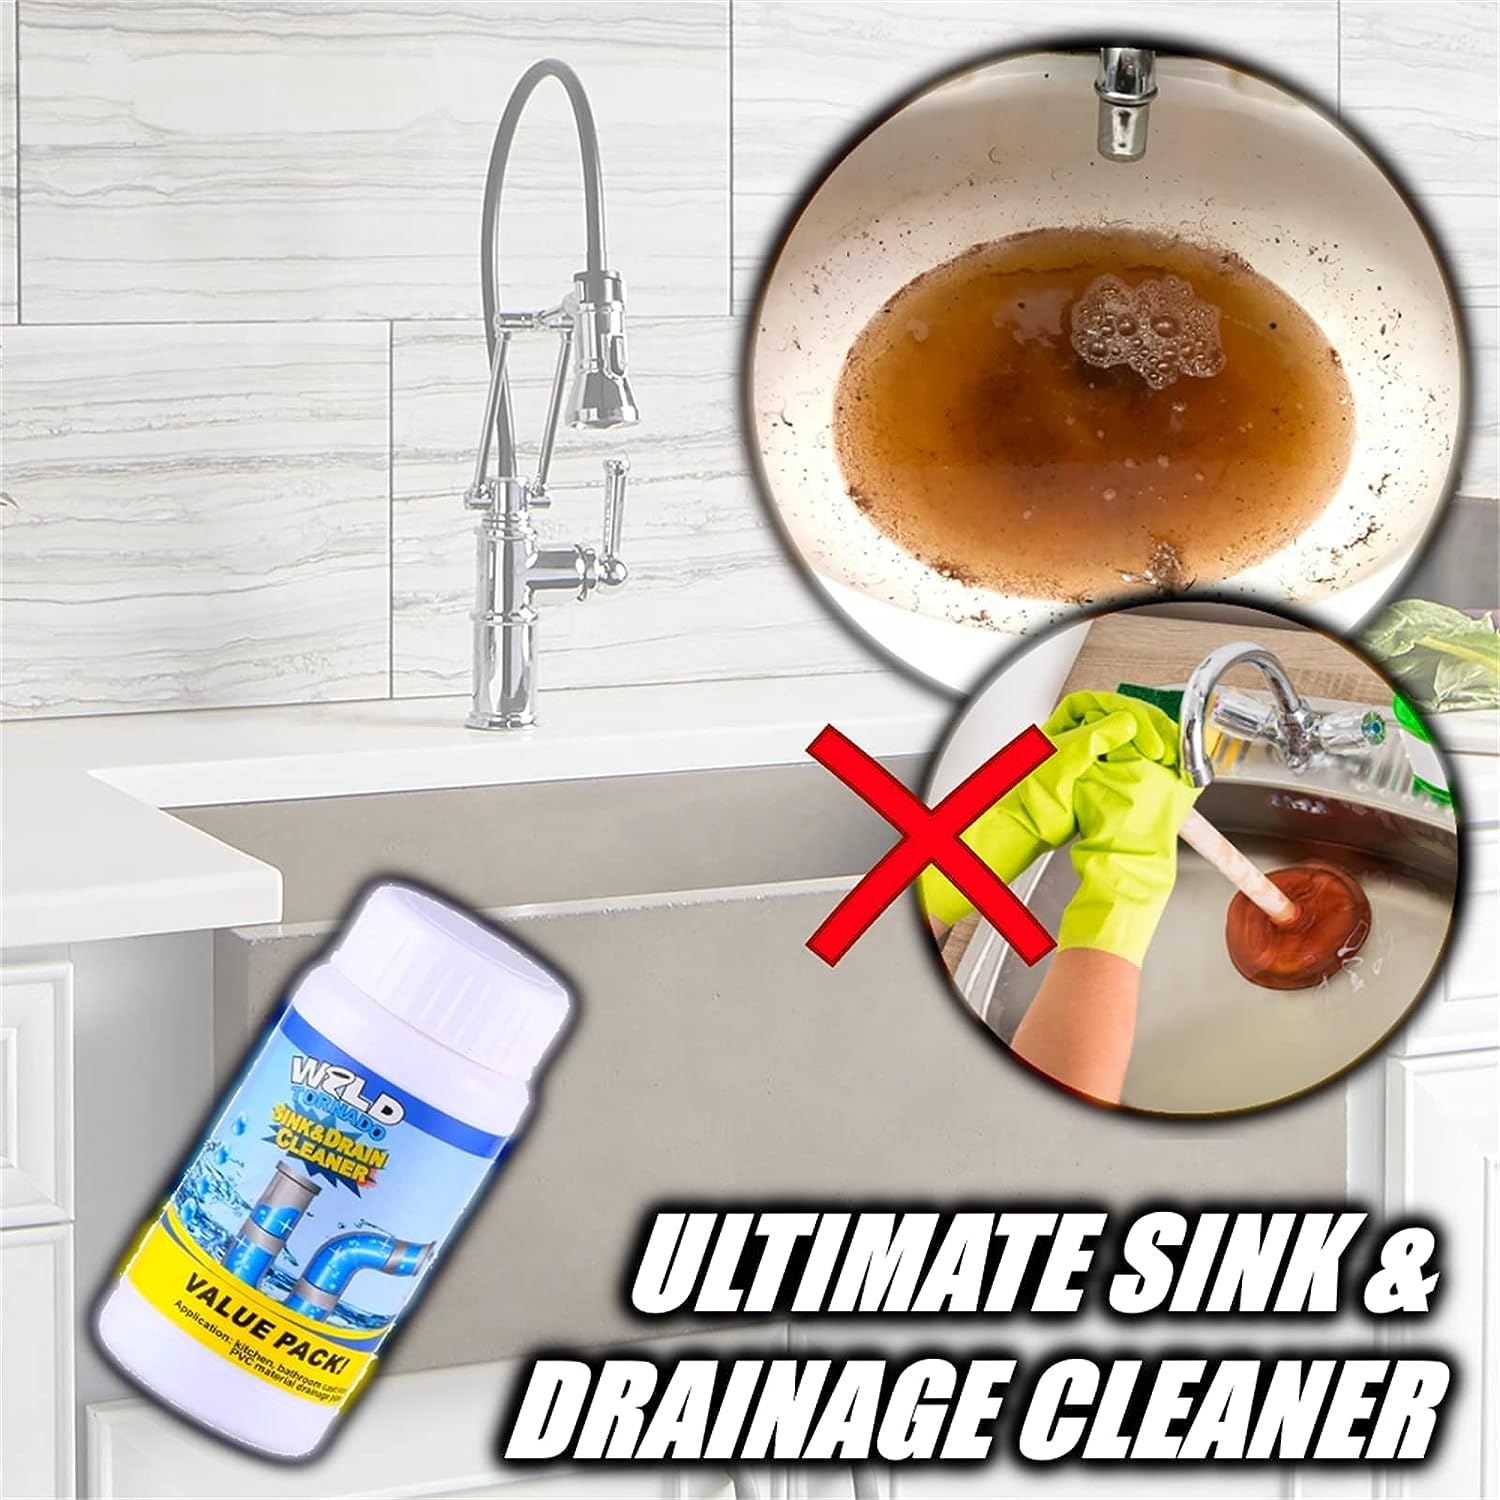 7934 Powerful Sink and Drain Cleaner, Portable Powder Cleaning Tool Super Clog Remover Chemical Powder Agent for Kitchen Toilet Pipe Dredging (110 Gm)